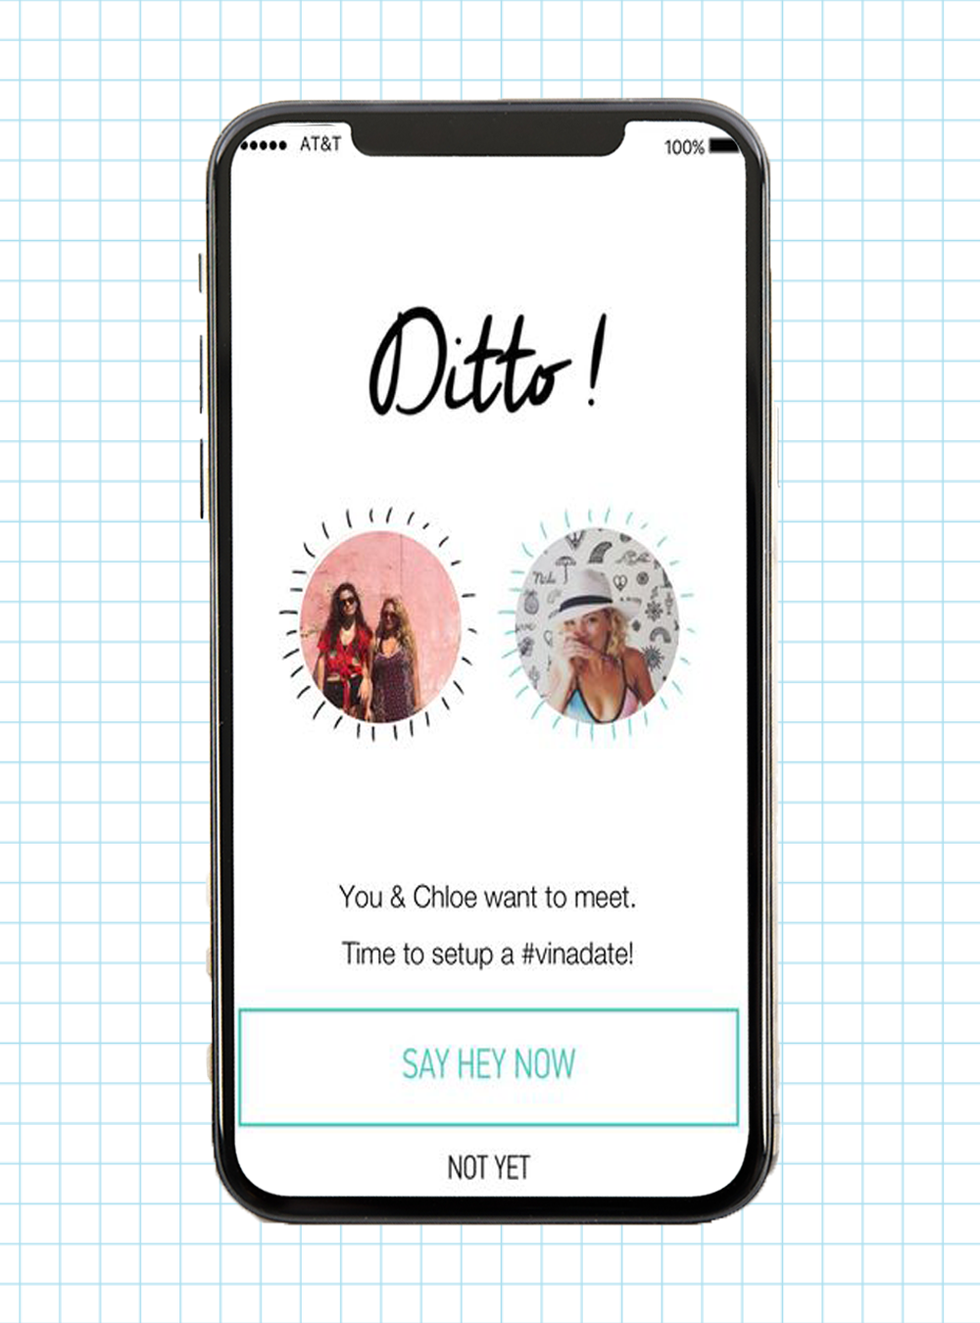 16 Apps For Making Friends (That Actually Work)